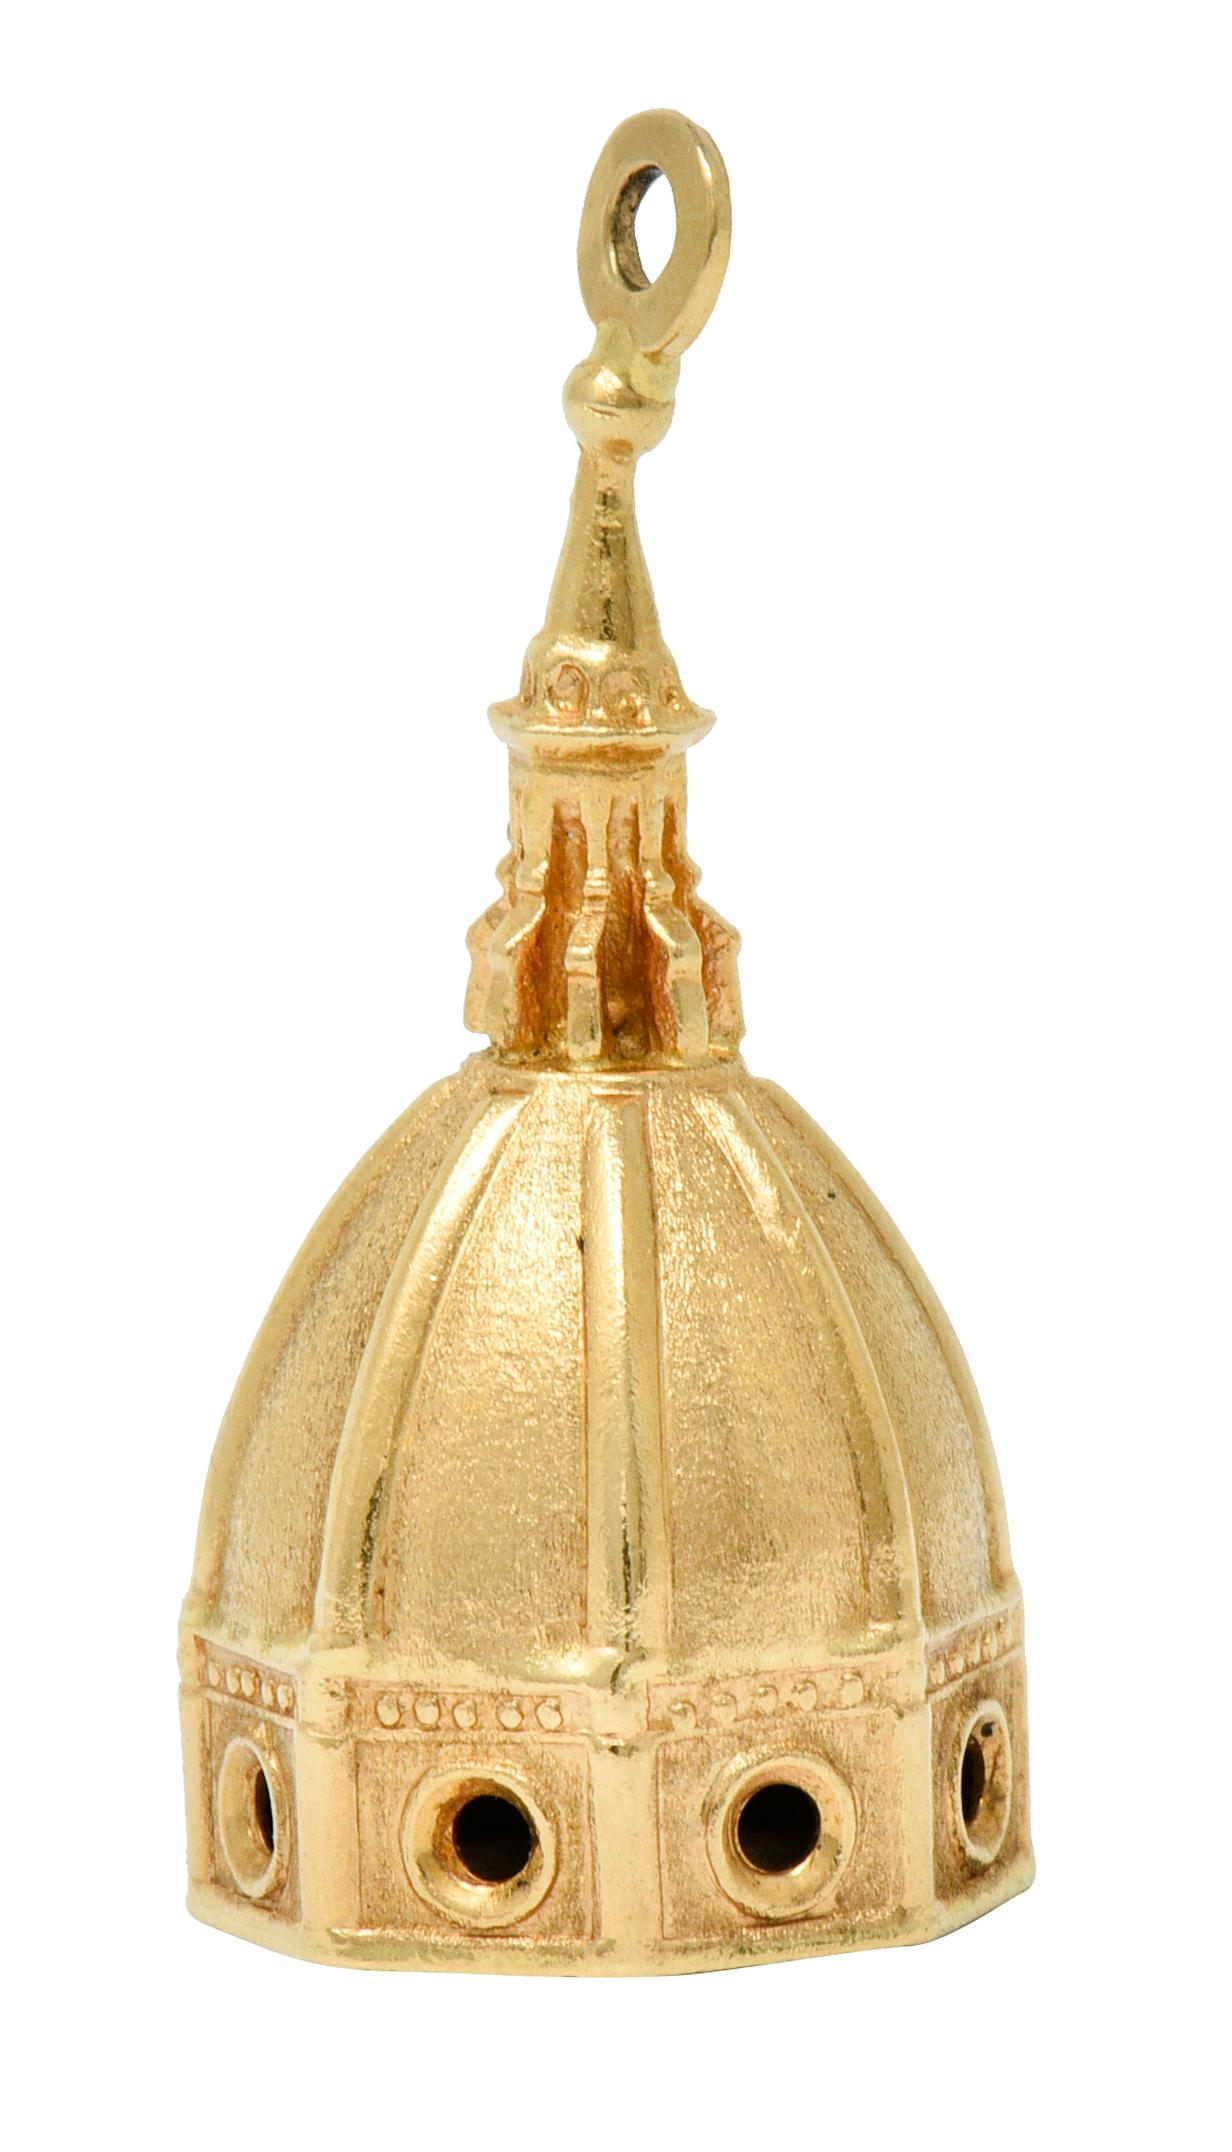 Charm is designed as the famed dome of Florence's Duomo Basilica

With an intricately rendered cupola and a pierced tambour

Completed by bale and a finely textured finish

With Italian assay marks for 18 karat gold

Signed UnoAerre

Circa: